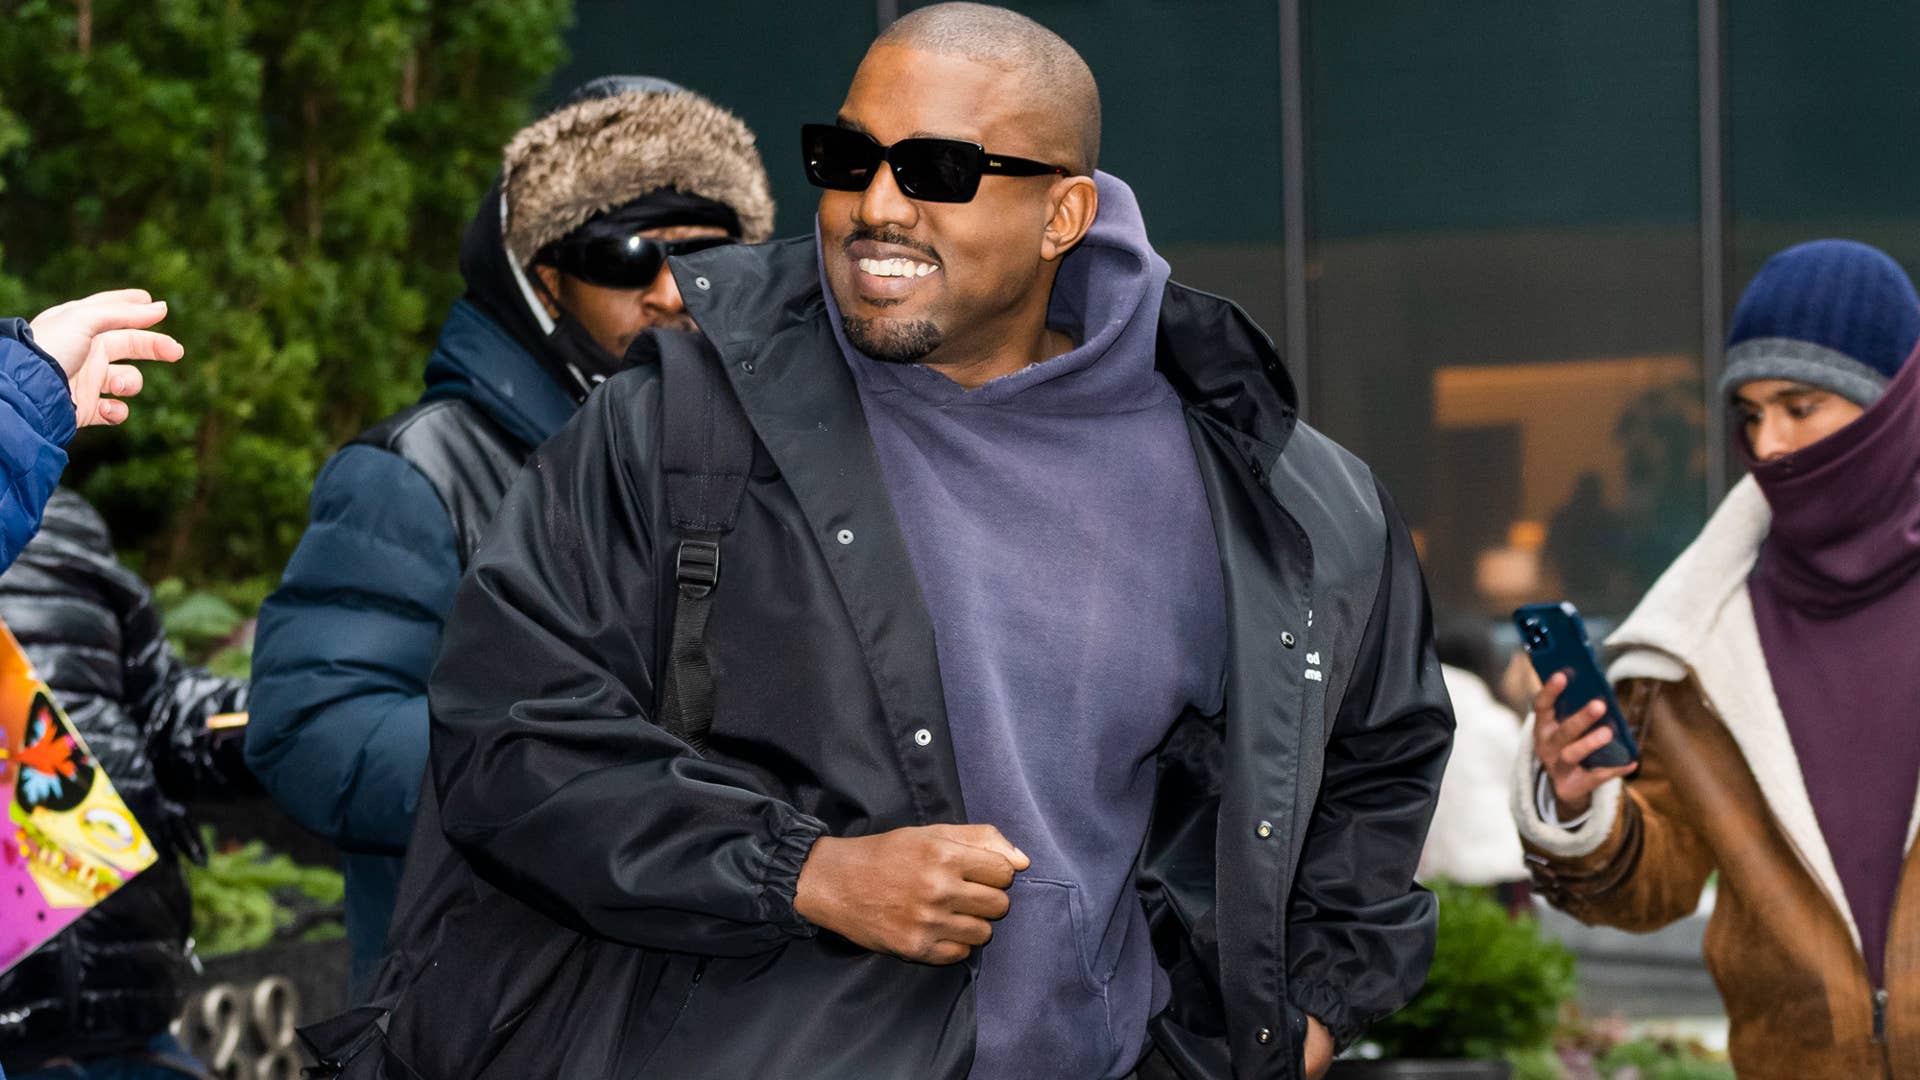 Ye is pictured smiling in front of photographers